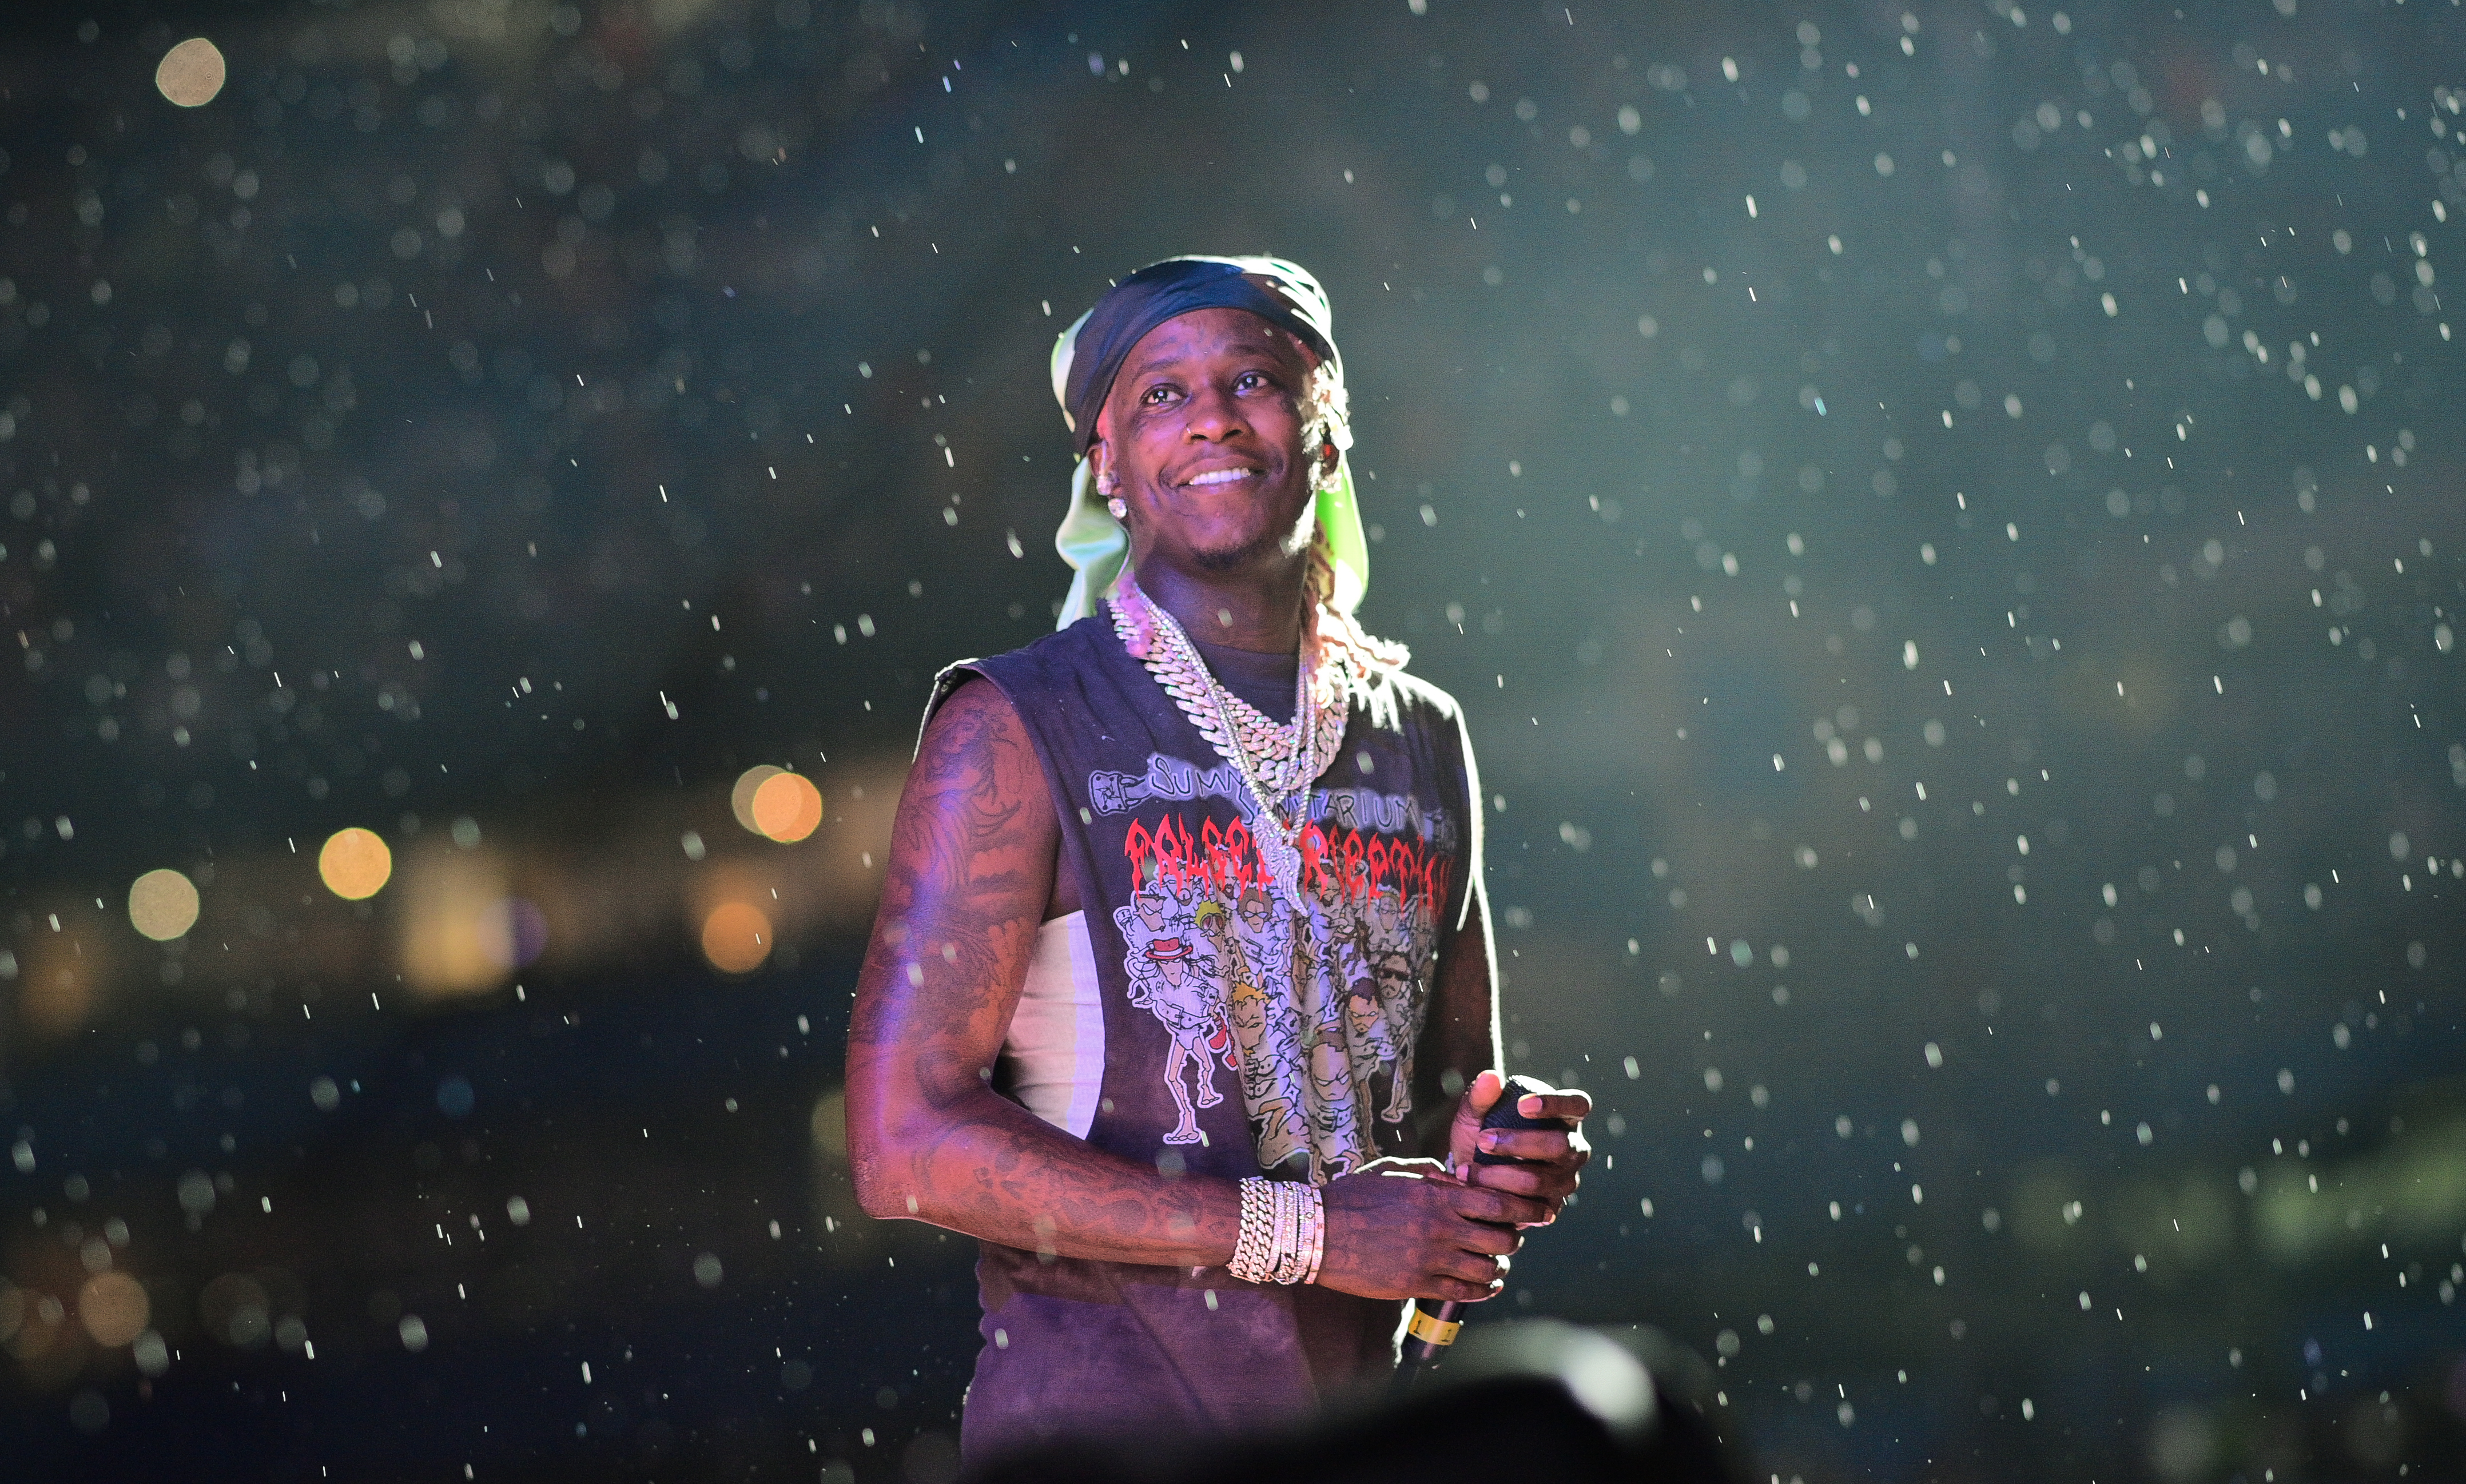 Young Thug performs at 107.9 Birthday Bash 25 at Center Parc Credit Union Stadium at Georgia State University on July 17, 2021, in Atlanta, Georgia. | Source: Getty Images